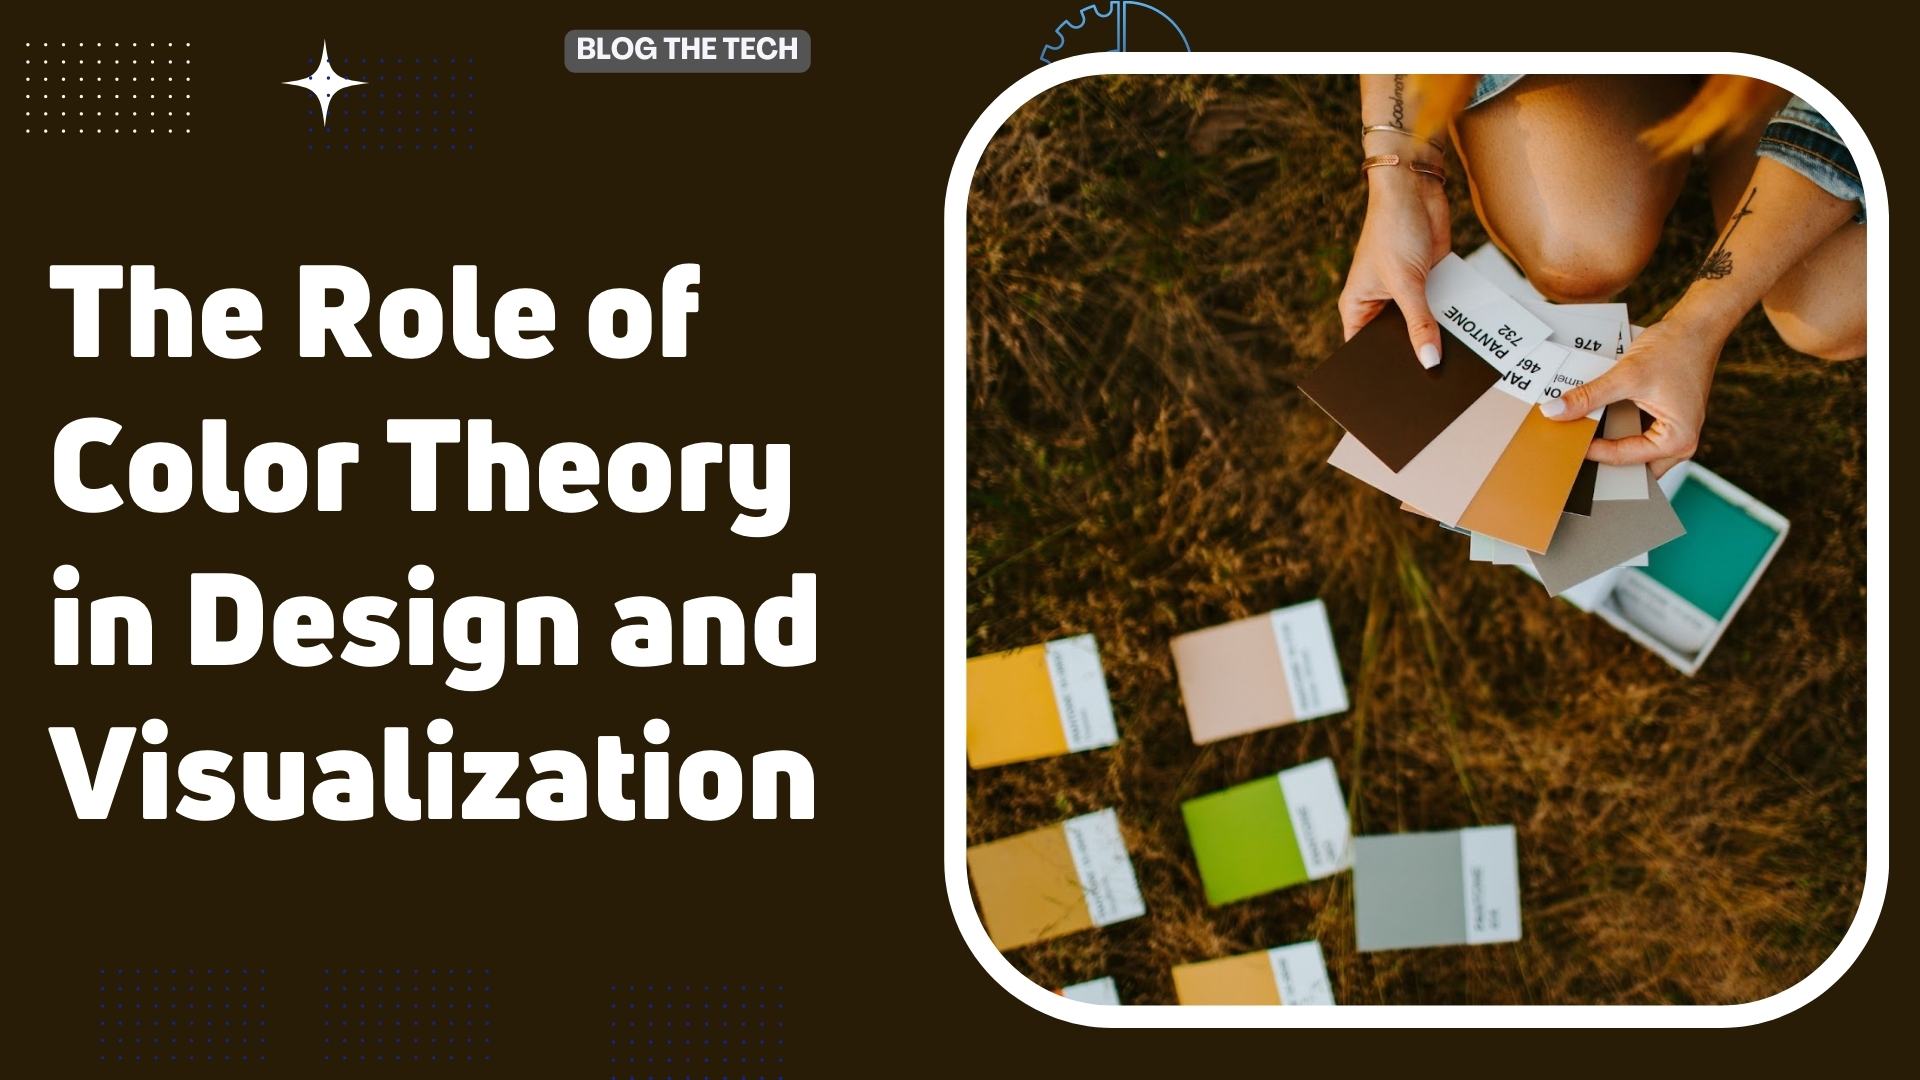 The Role of Color Theory in Design and Visualization